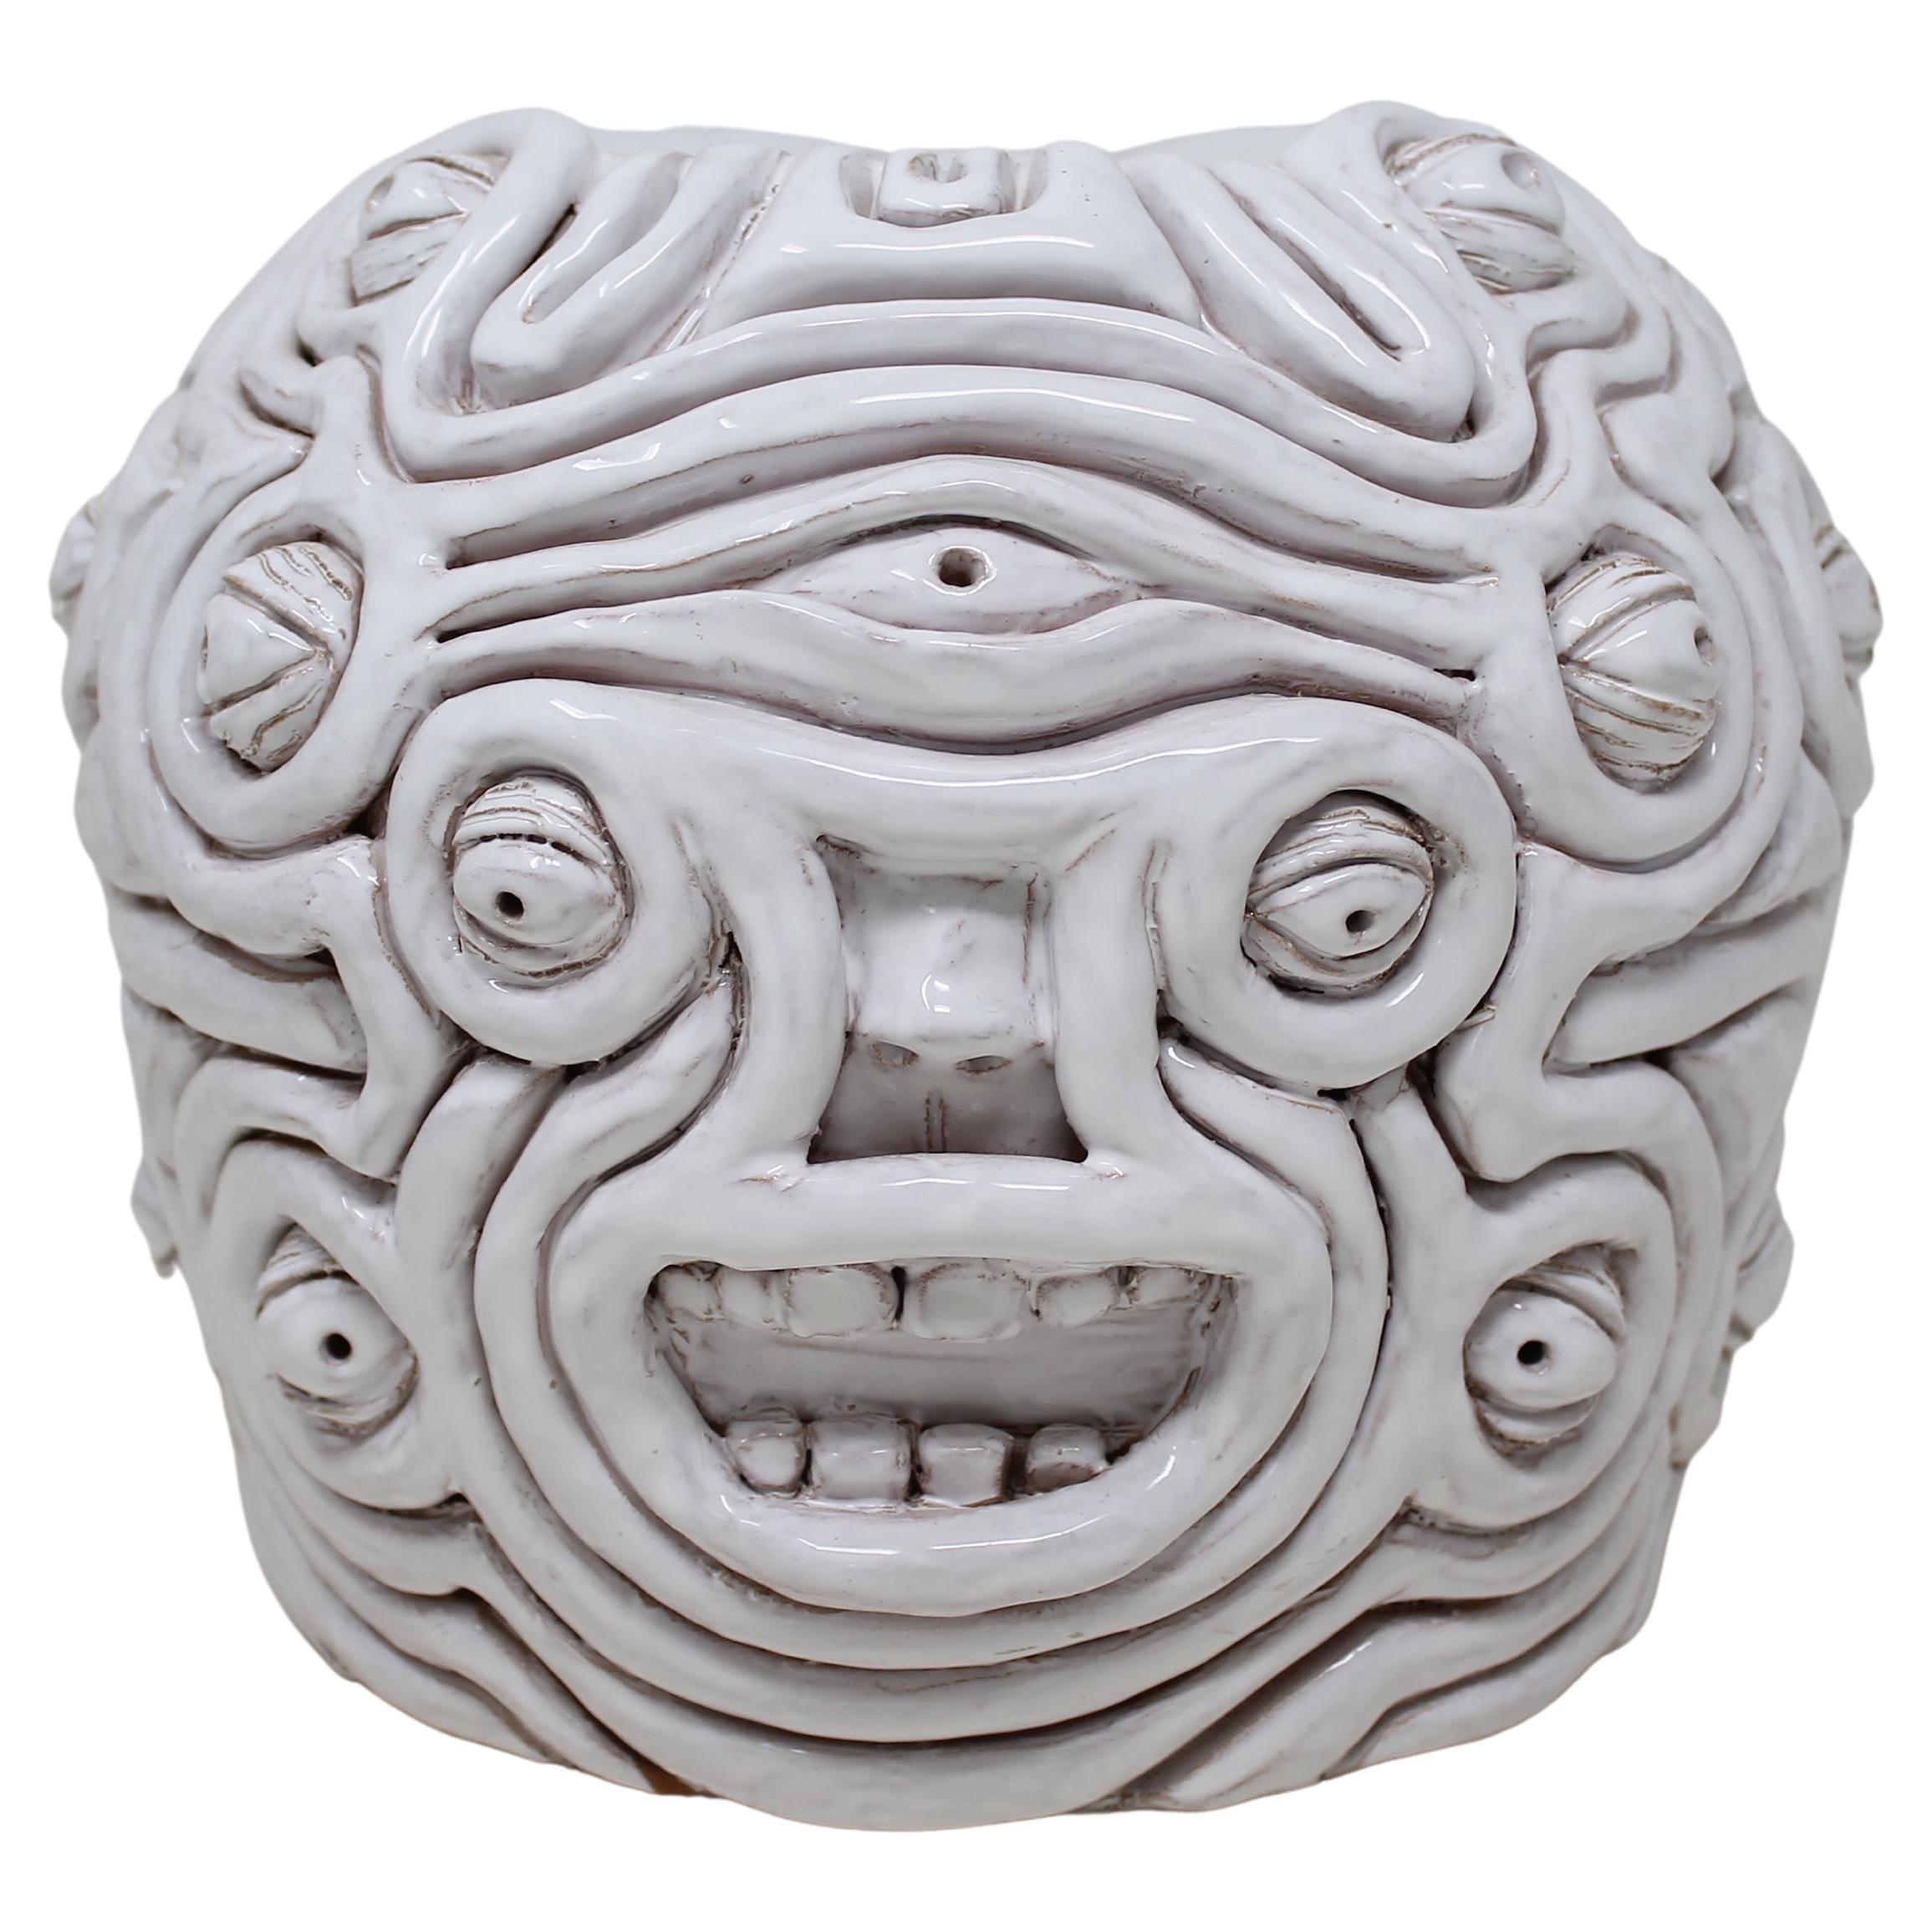 Freaklab Vase-Eyes Made Entirely by Hand in Ceramic, White Color